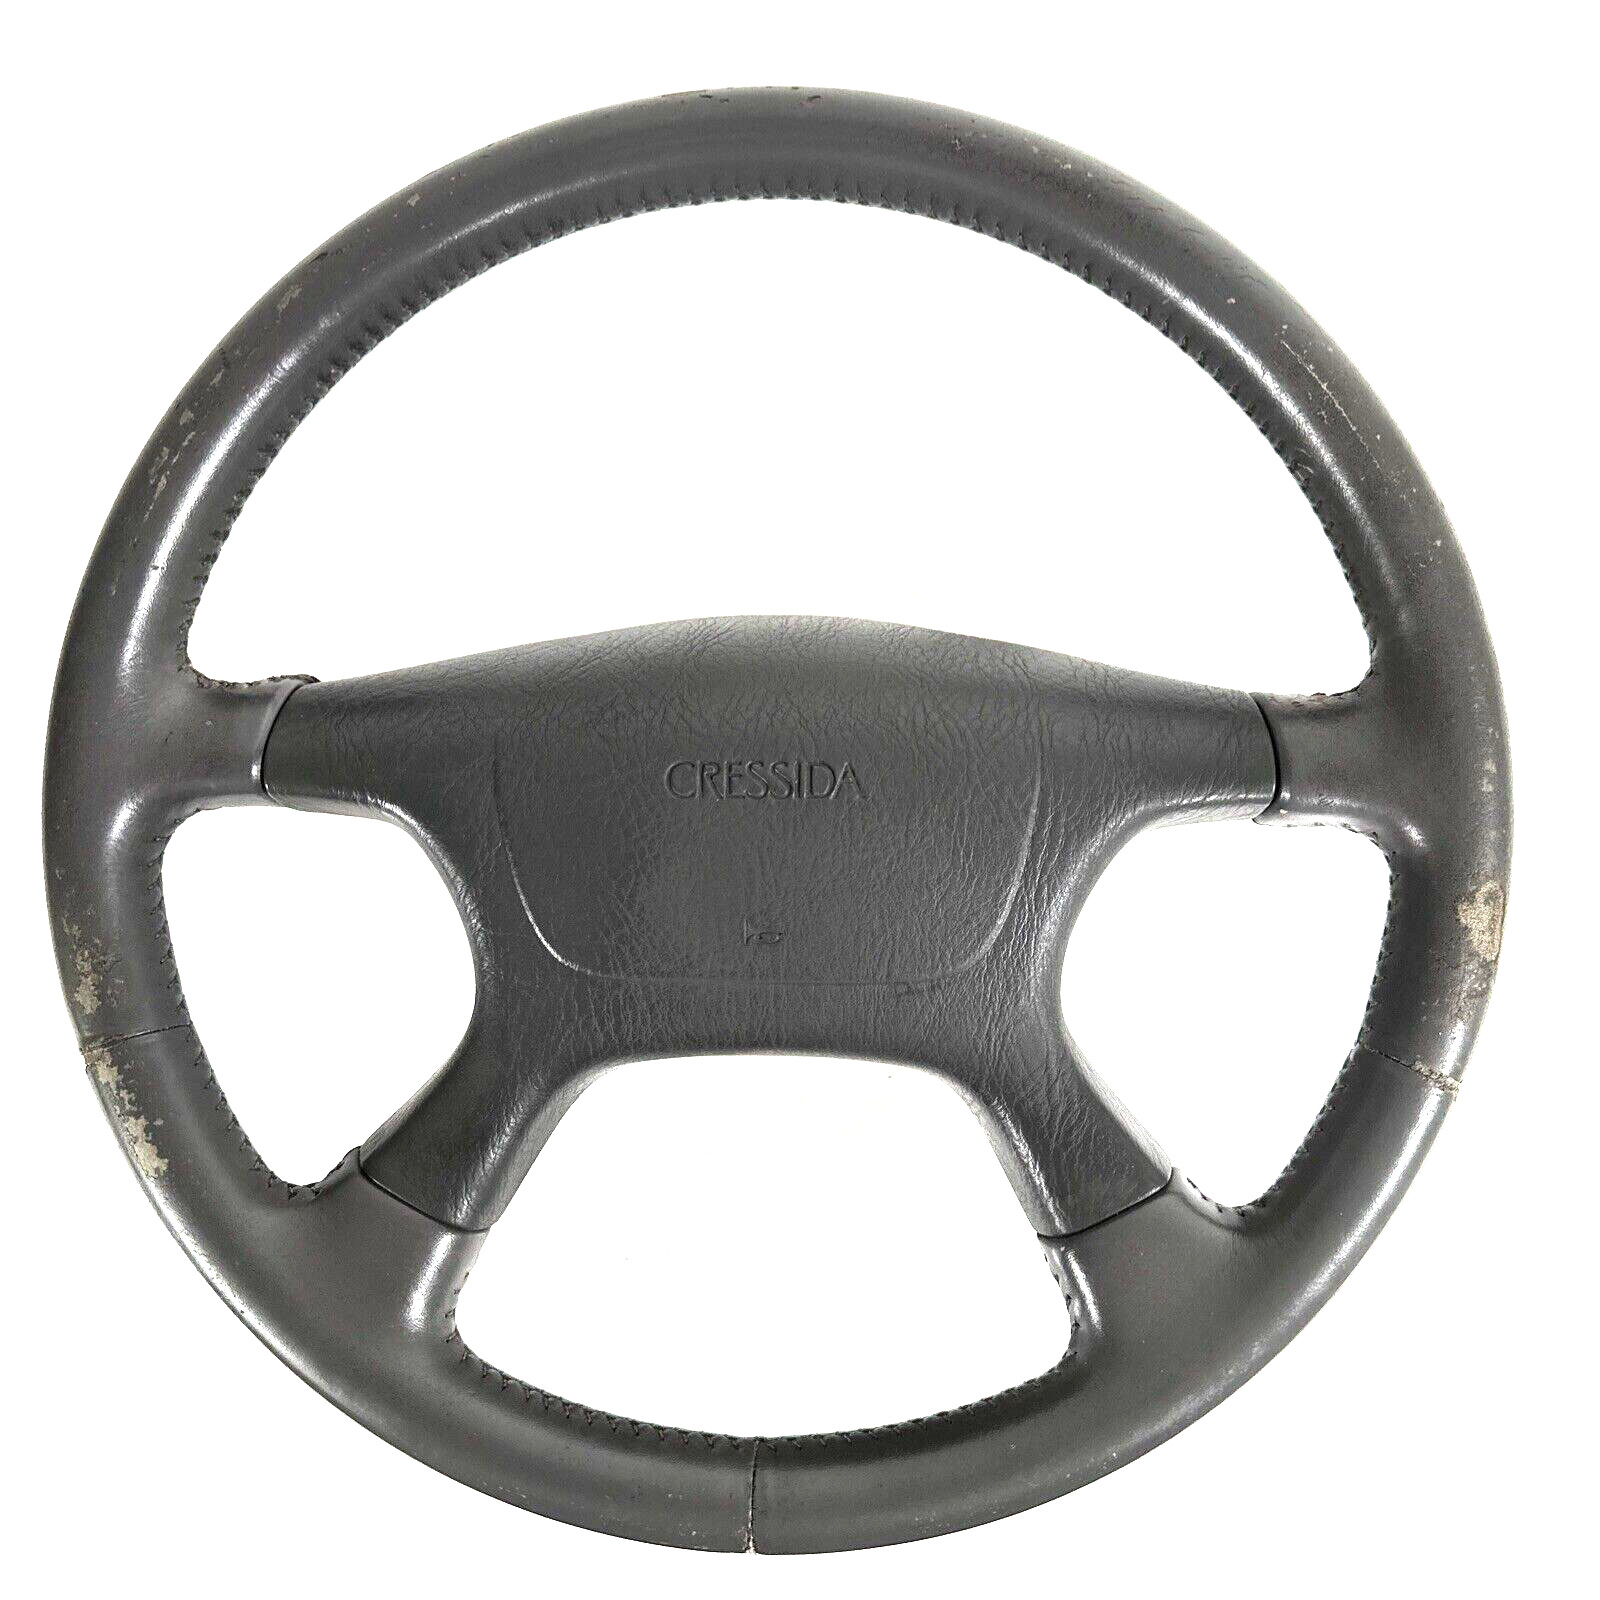 1989-92 OEM Toyota Cressida Leather Steering Wheel w/horn cover